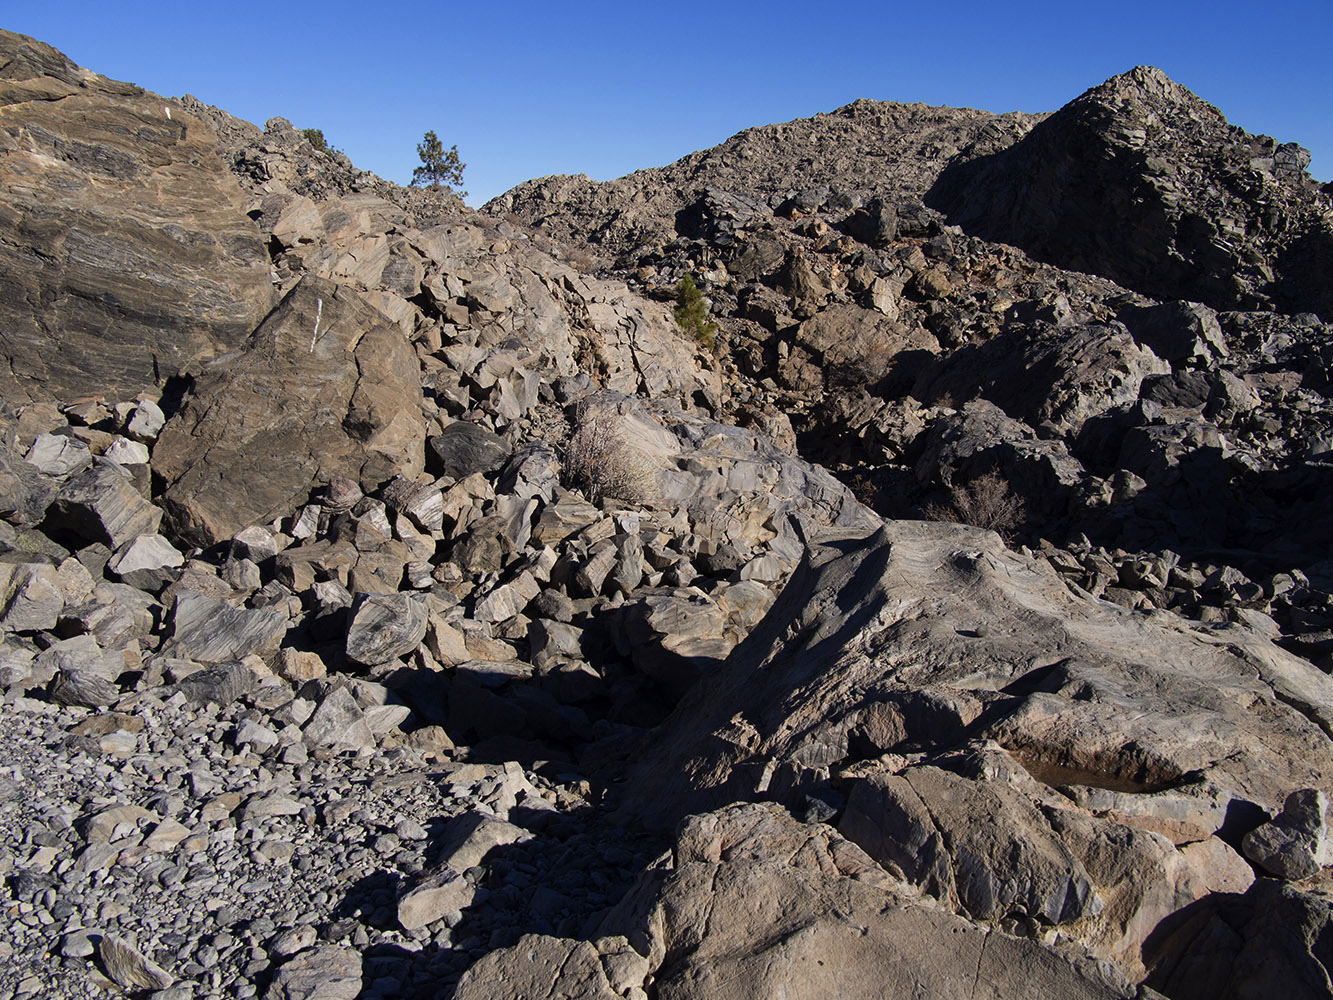 Panum Crater:  Large blocks of pumice and obsidian form the crater plug.